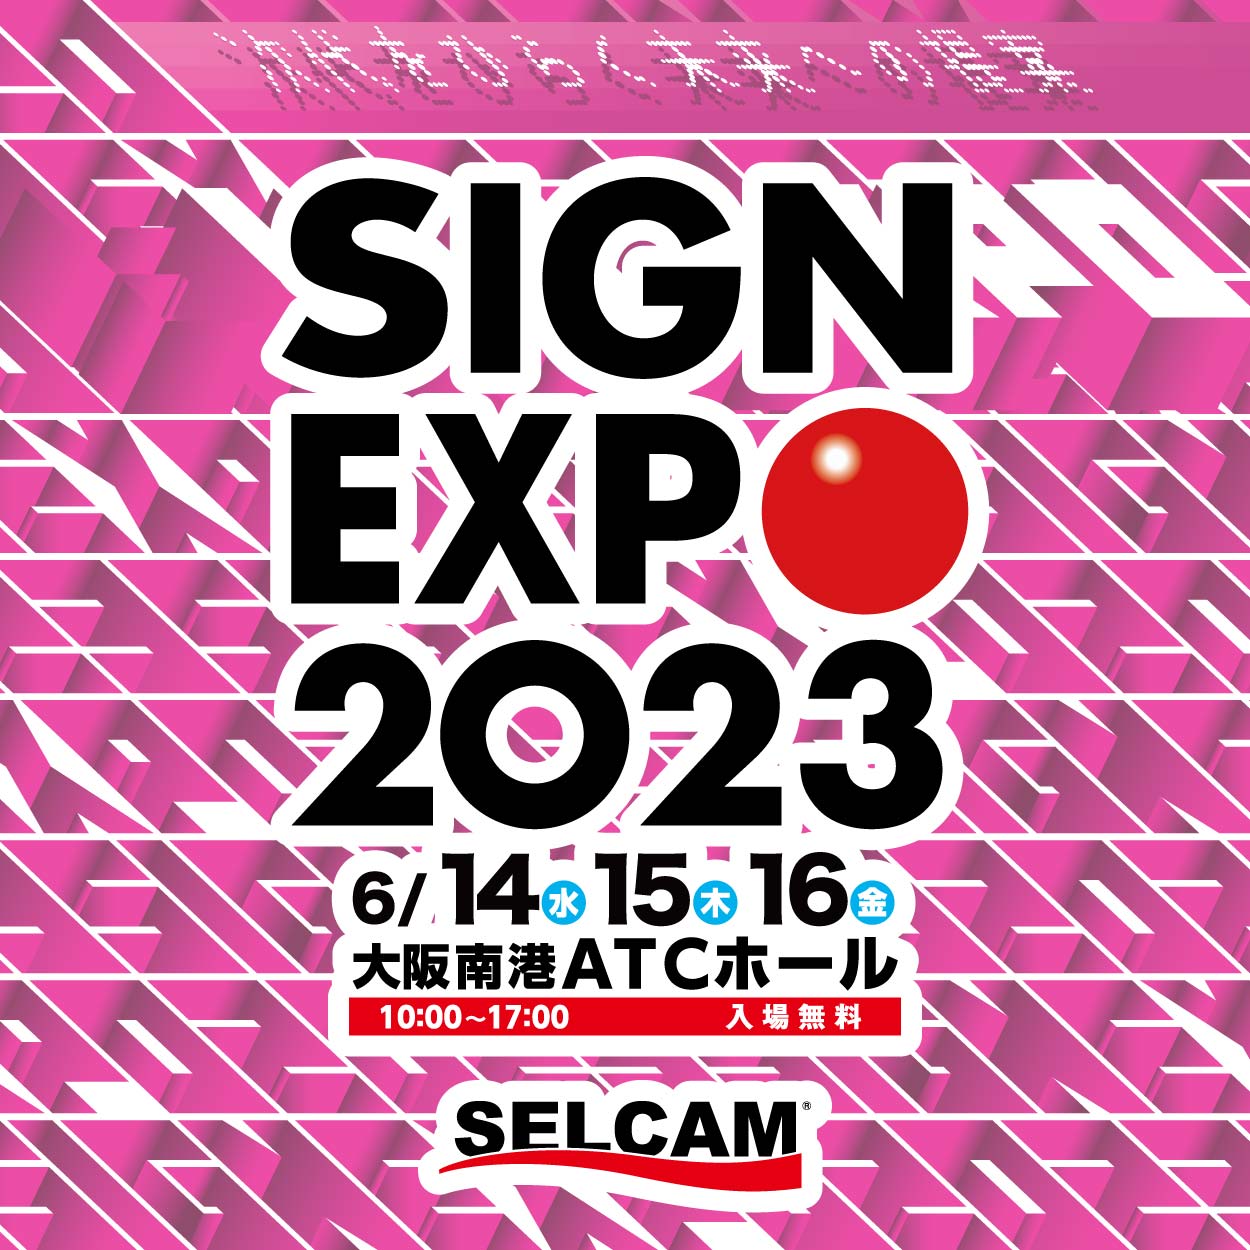 SIGN EXPO 2023　出展のご案内